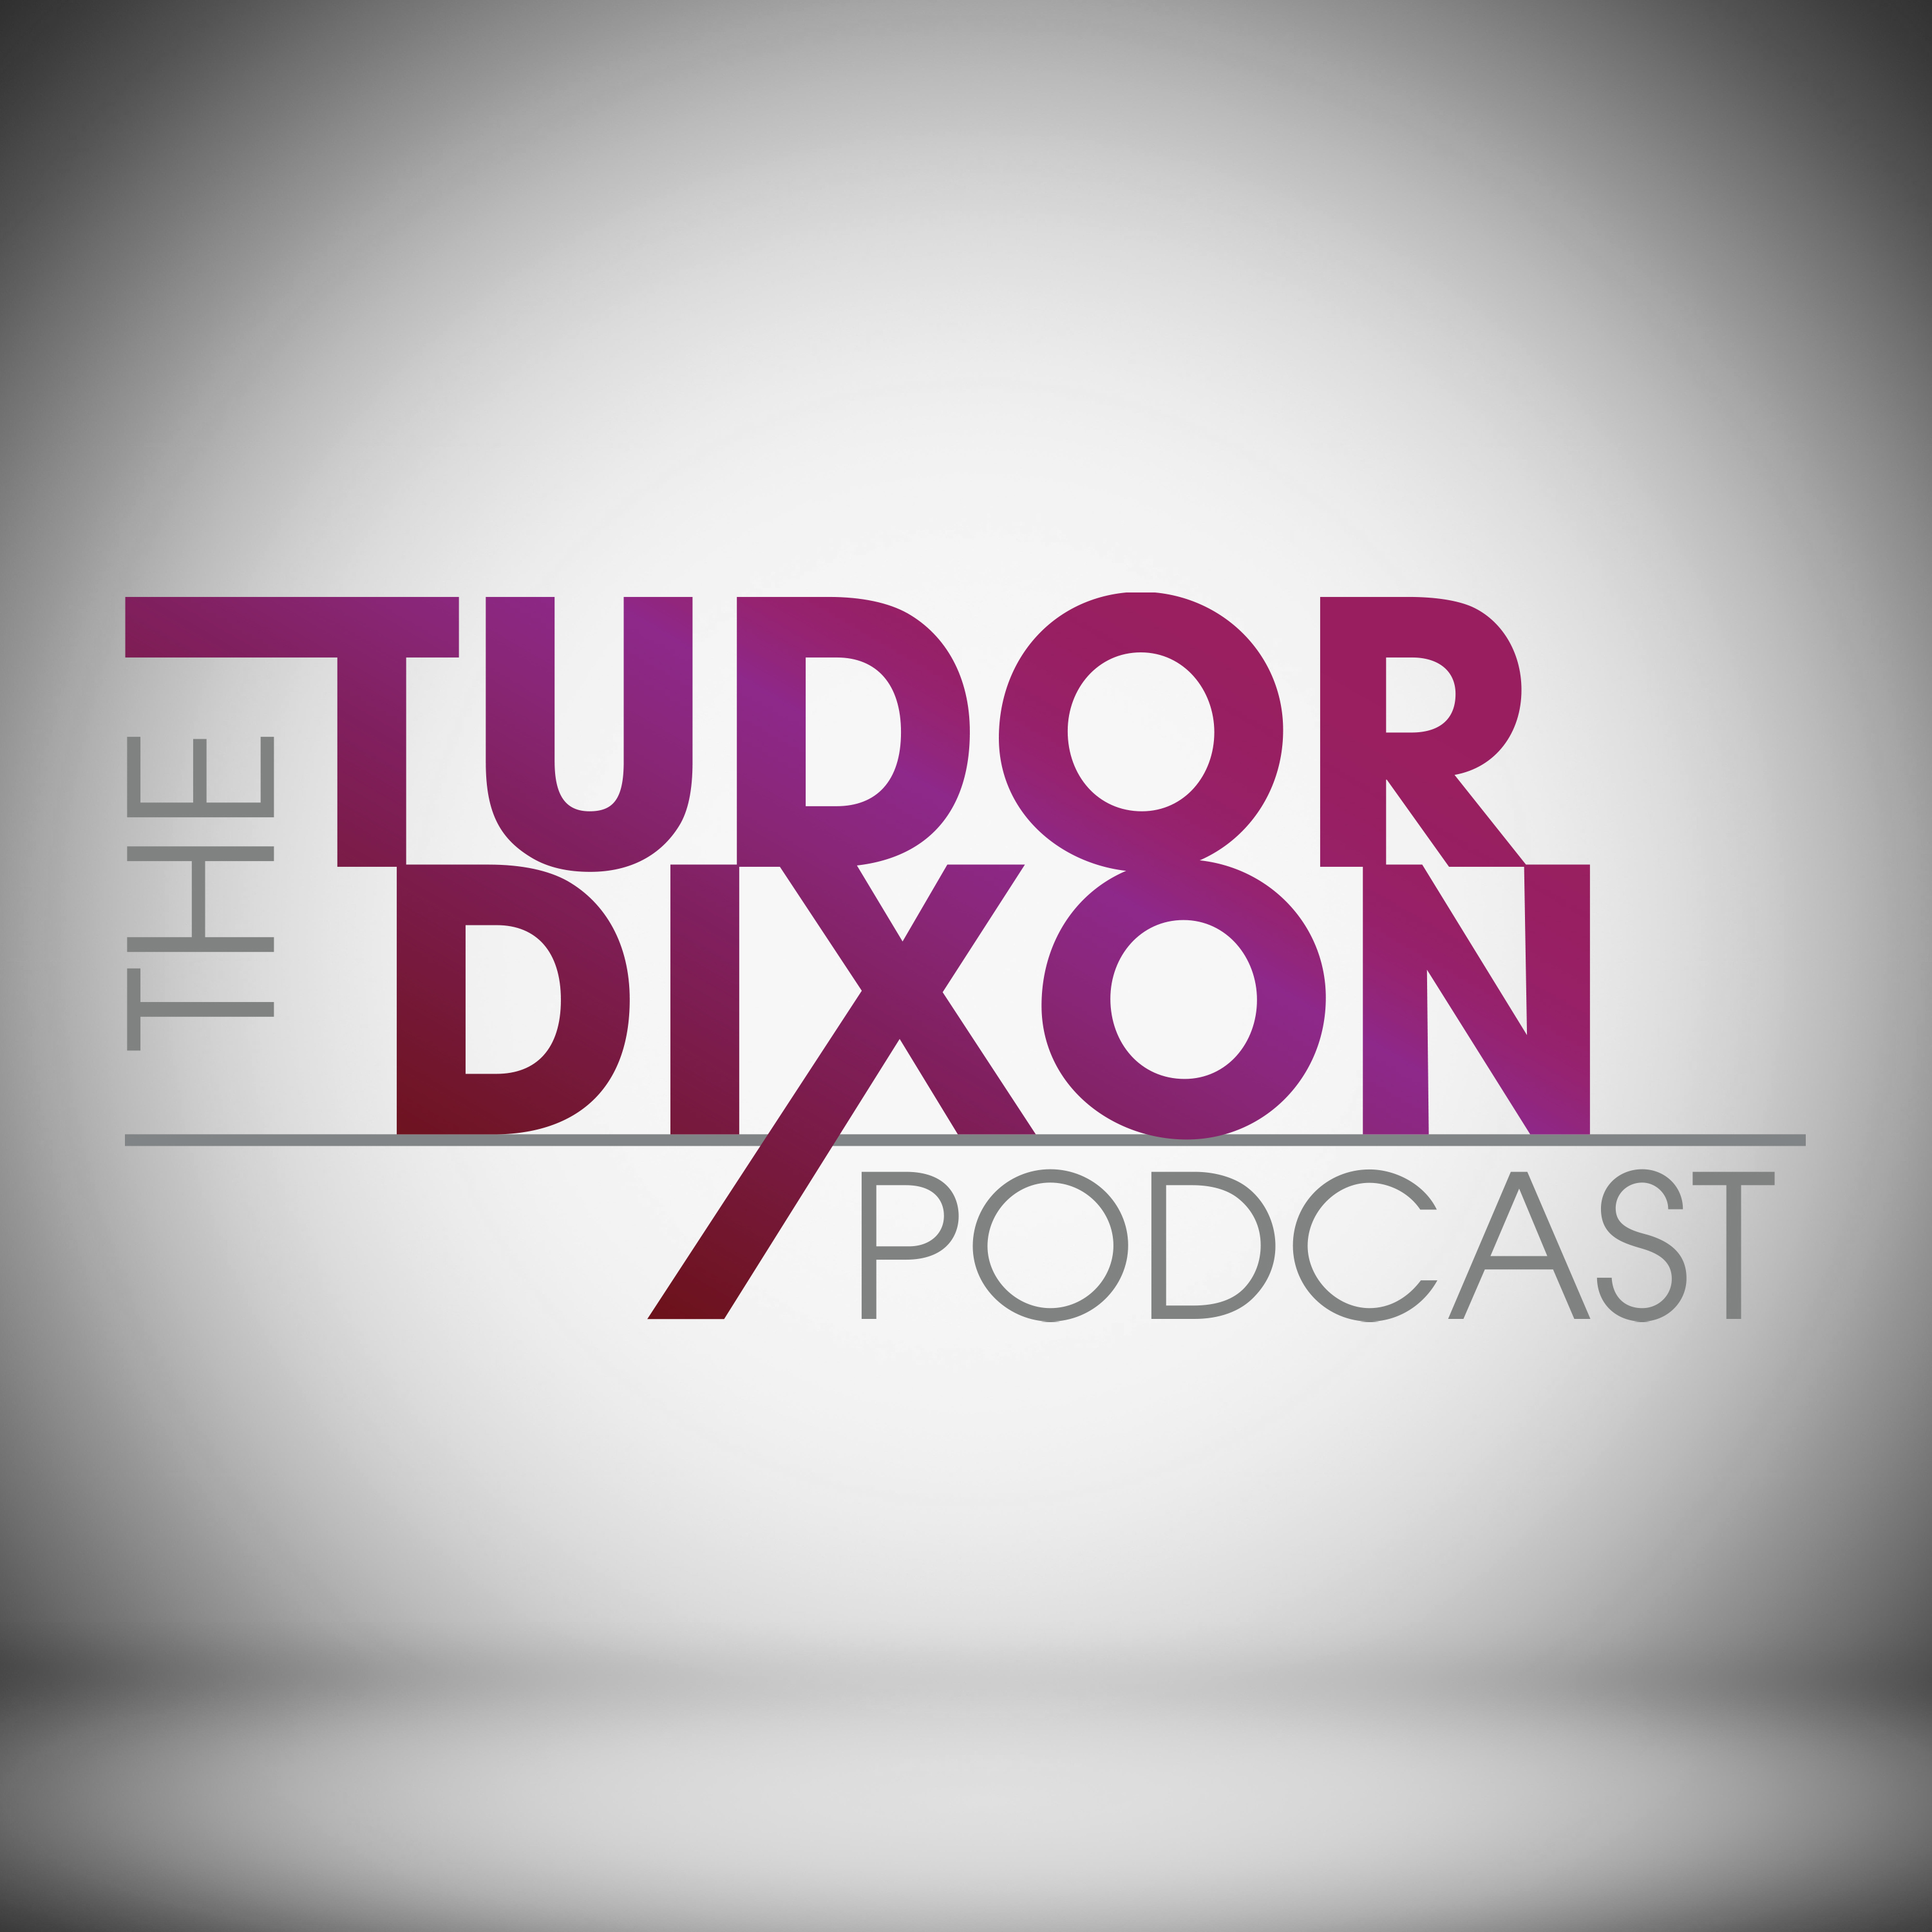 The Tudor Dixon Podcast: Exposing China's Silent Takeover